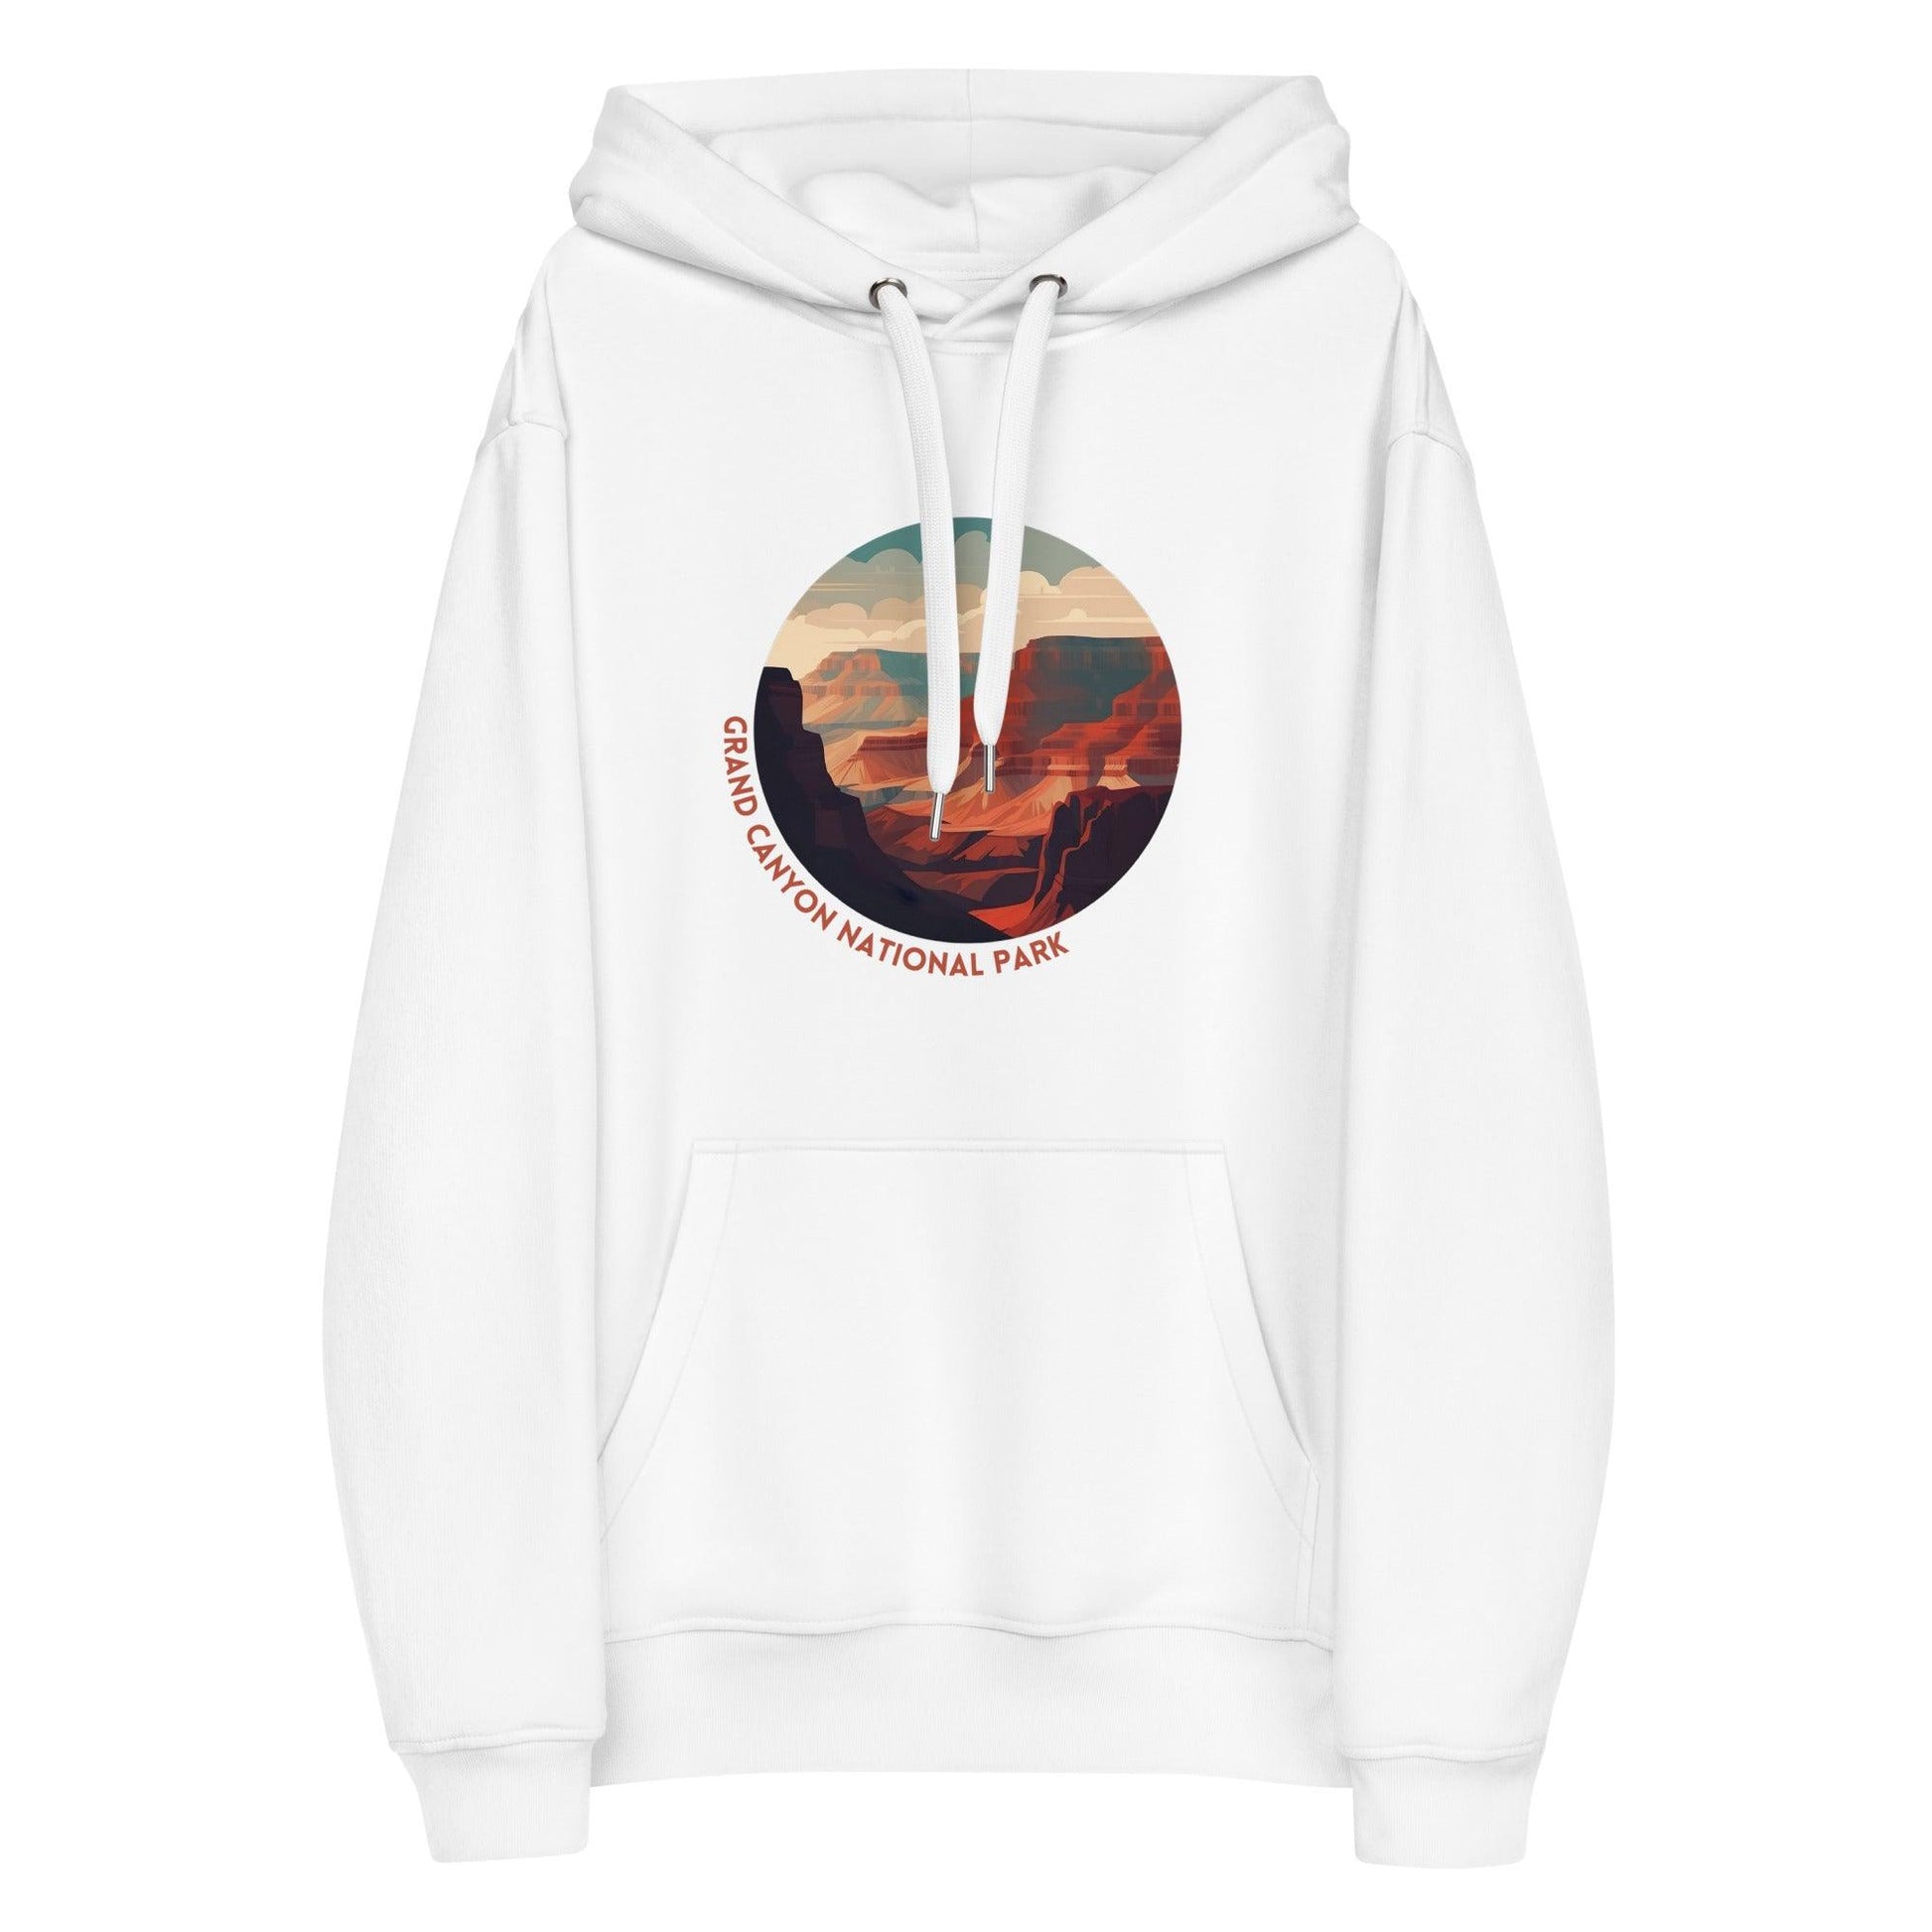 Grand Canyon National Park hoodie